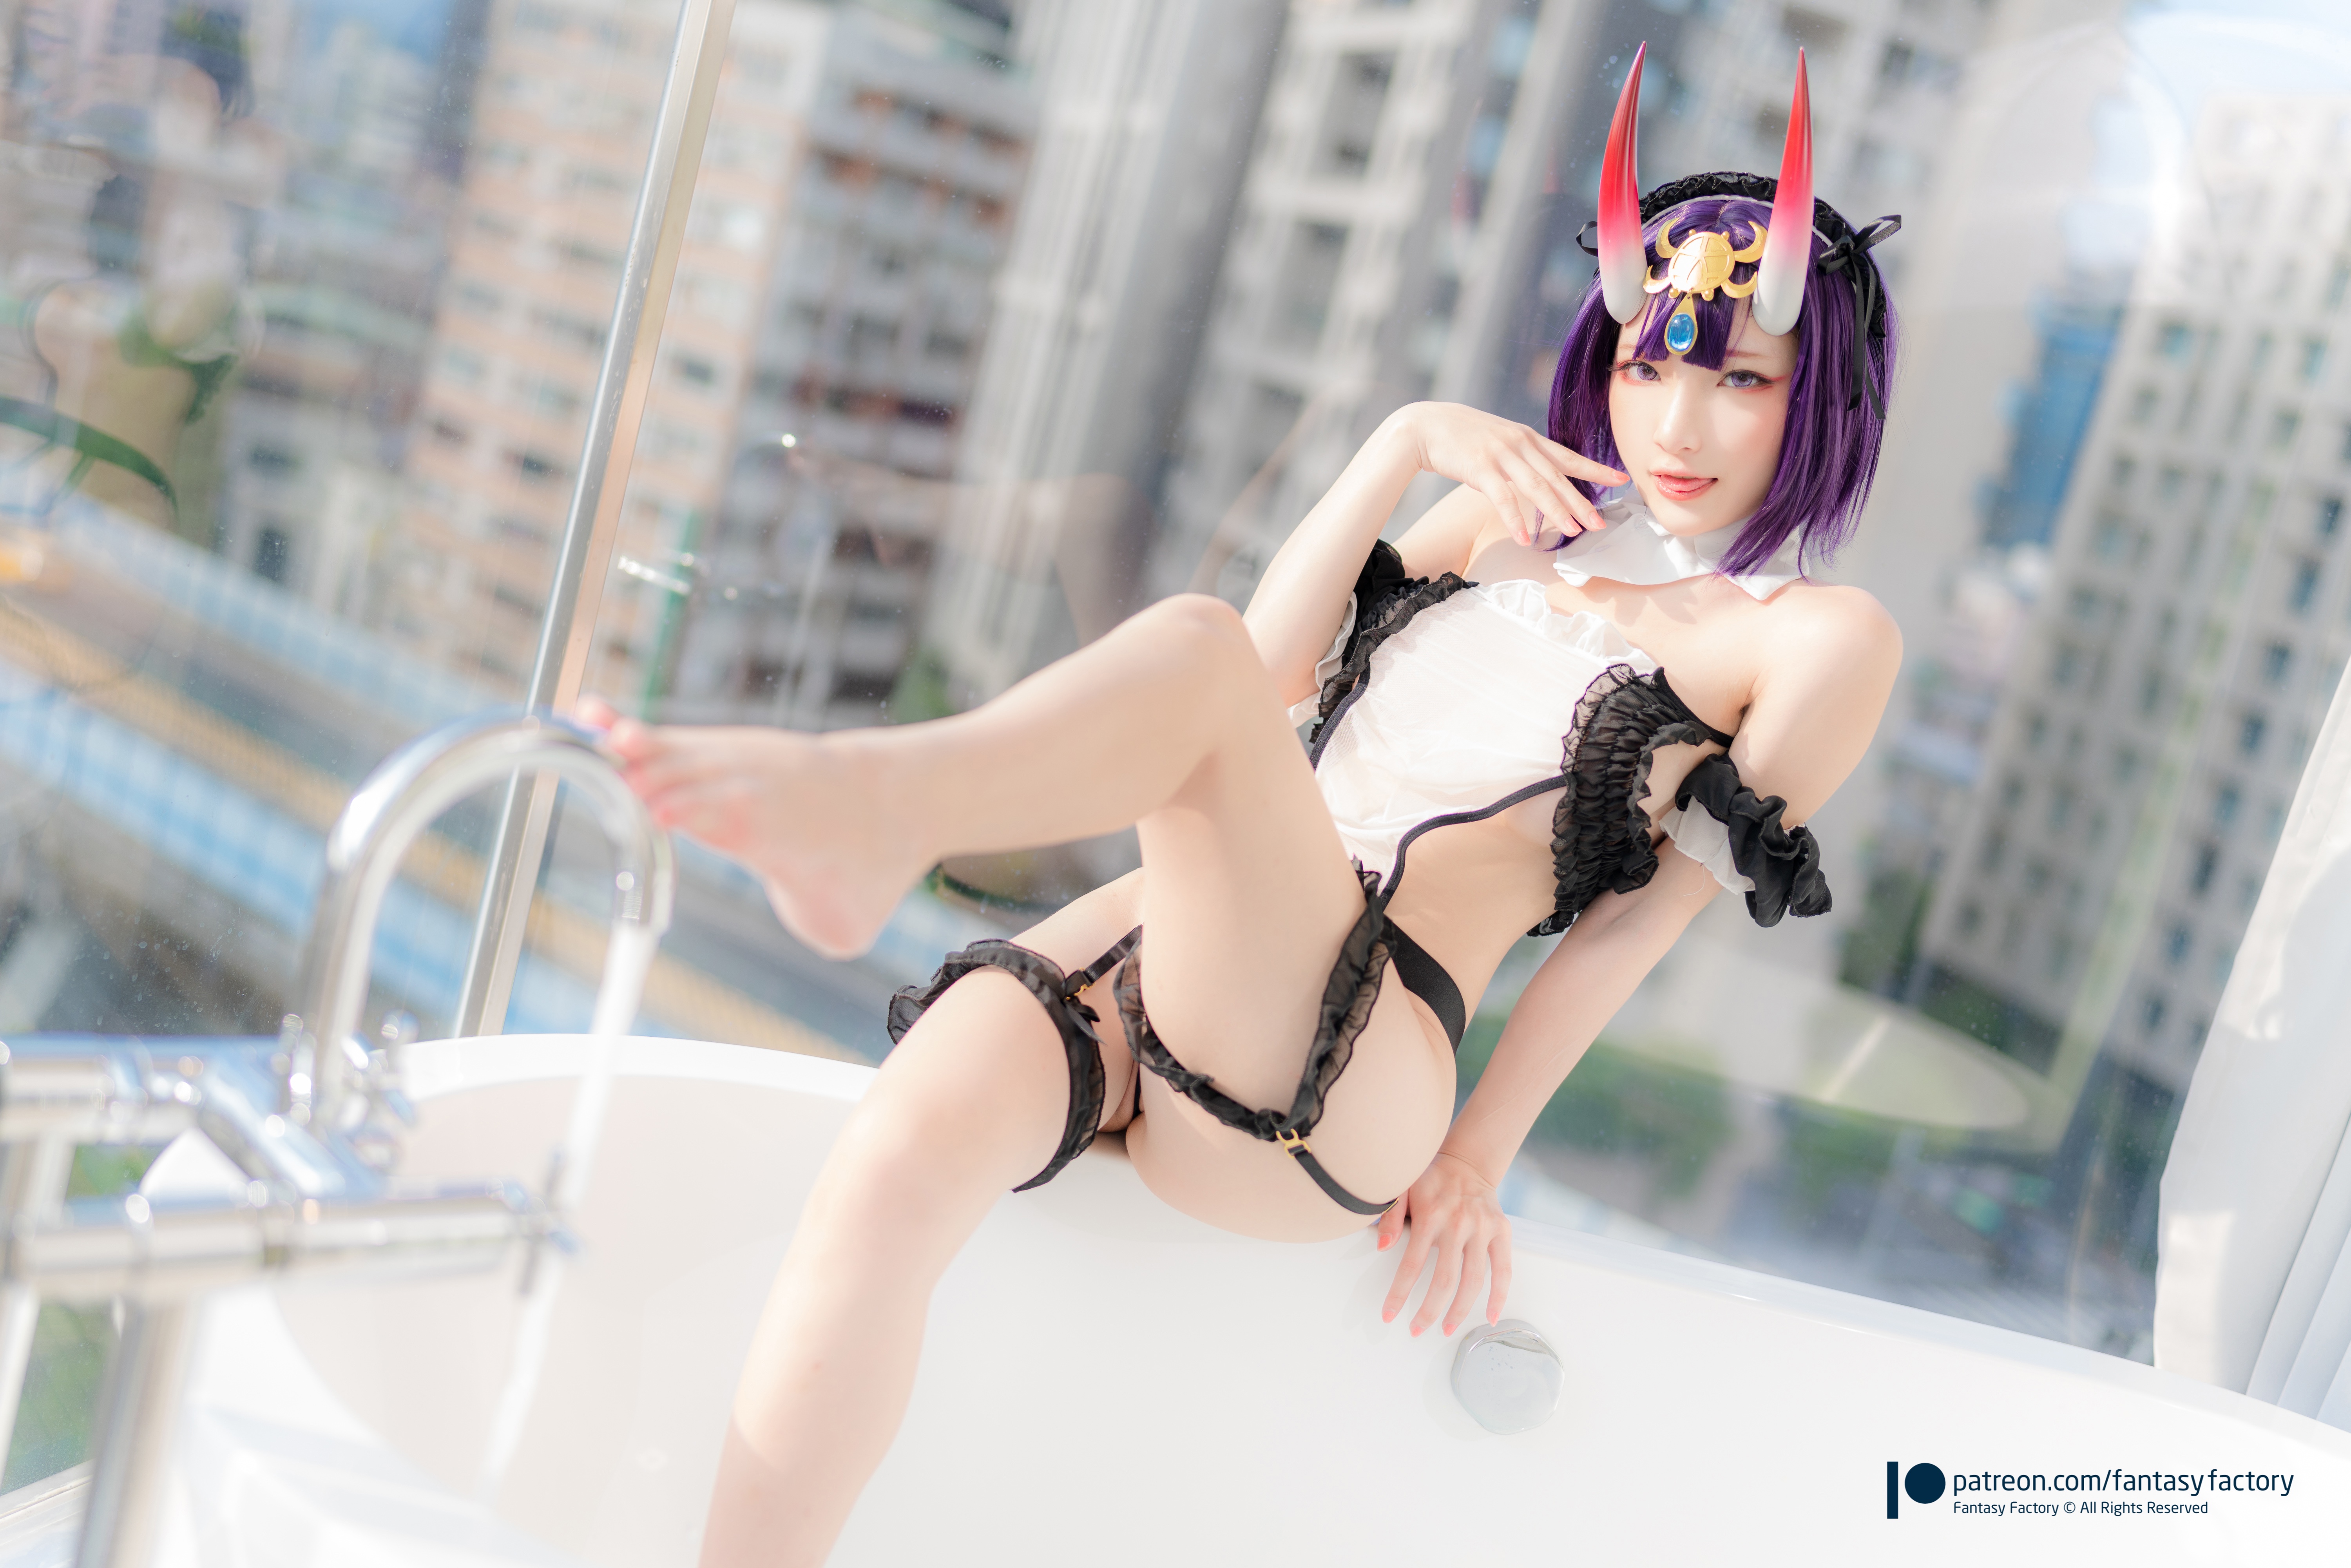 People 6000x4002 Fantasy Factory women model Asian cosplay Shuten Douji (Fate/Grand Order) Fate/Grand Order anime lingerie bathtub indoors women indoors barefoot pointed toes feet legs leg up pale tongue out bathroom in bathroom water wet body wet